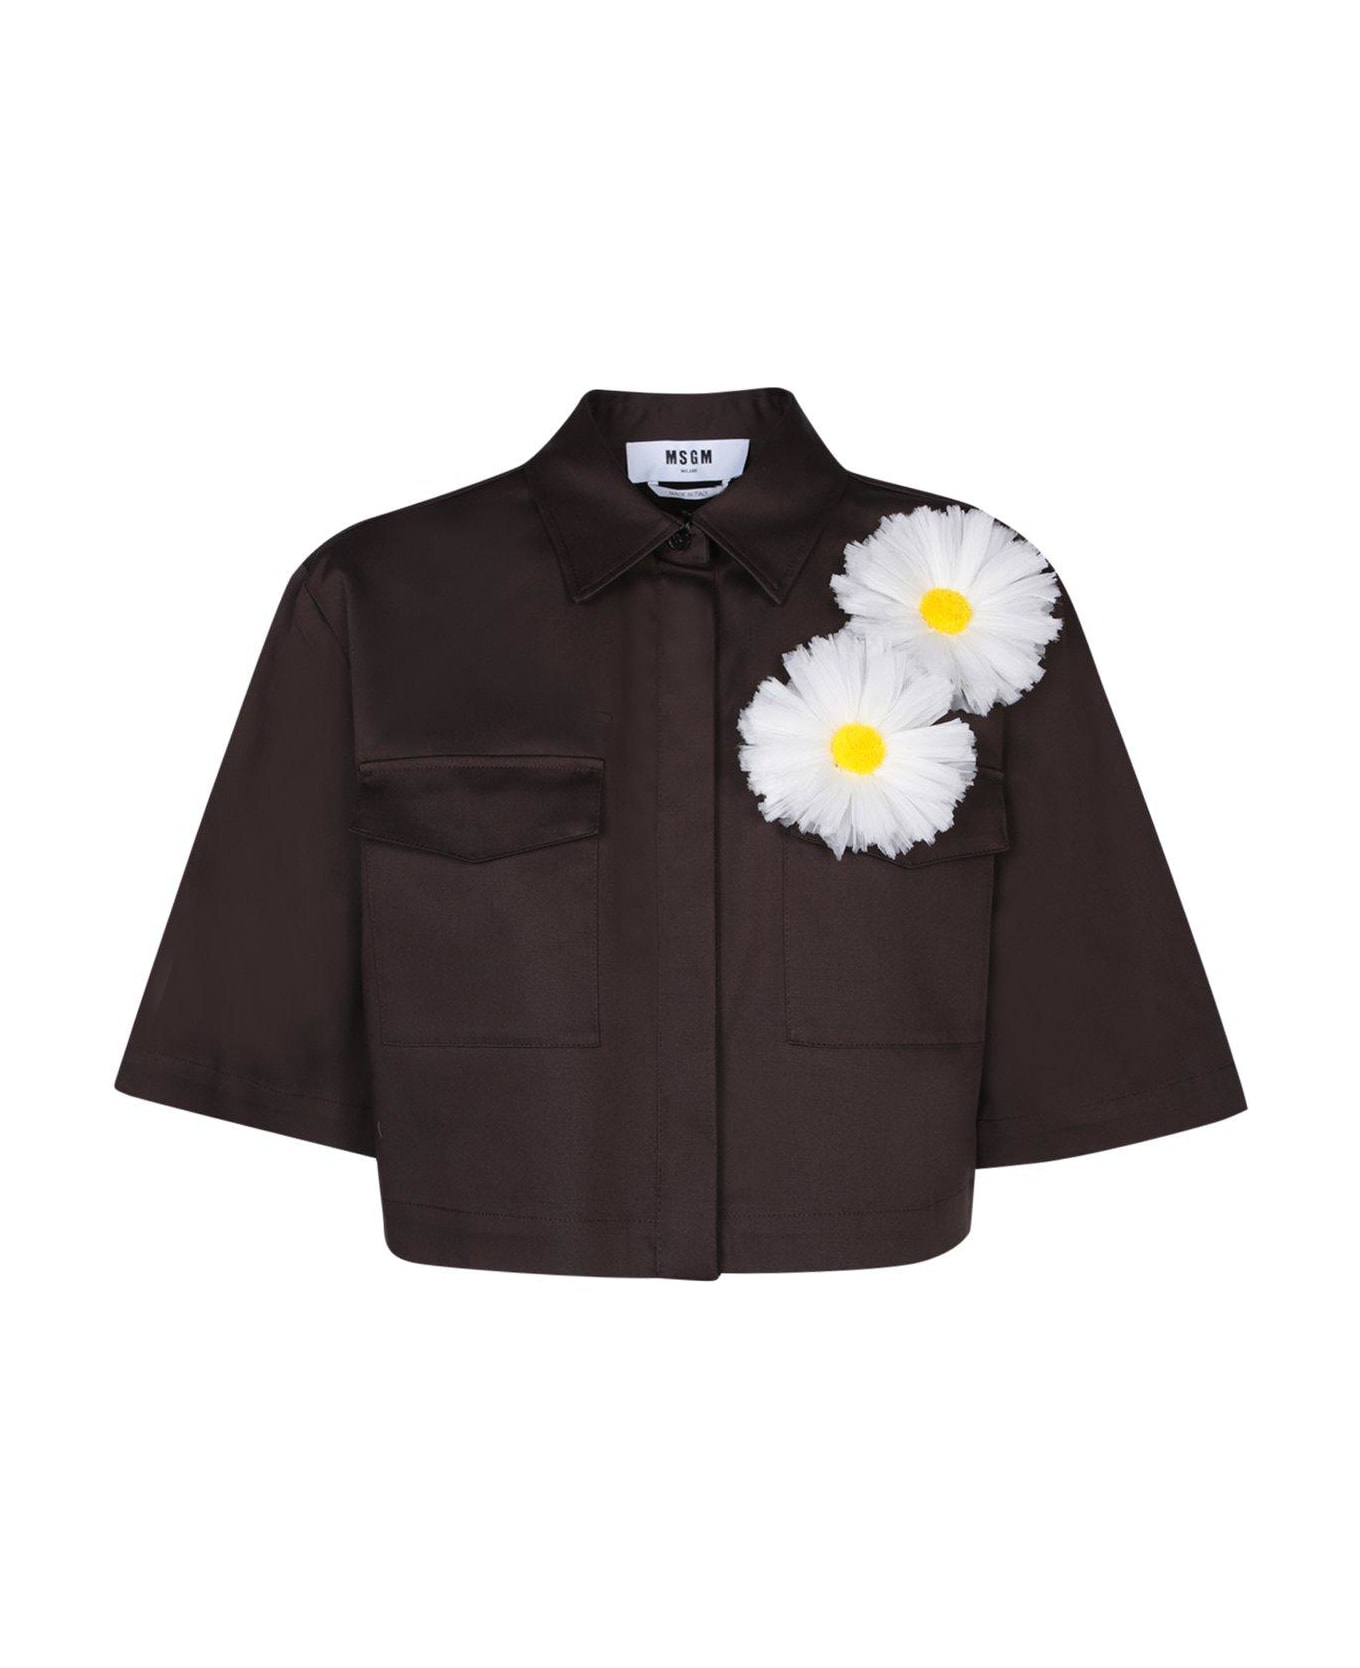 MSGM Floral Detailed Cropped Shirt - Brown